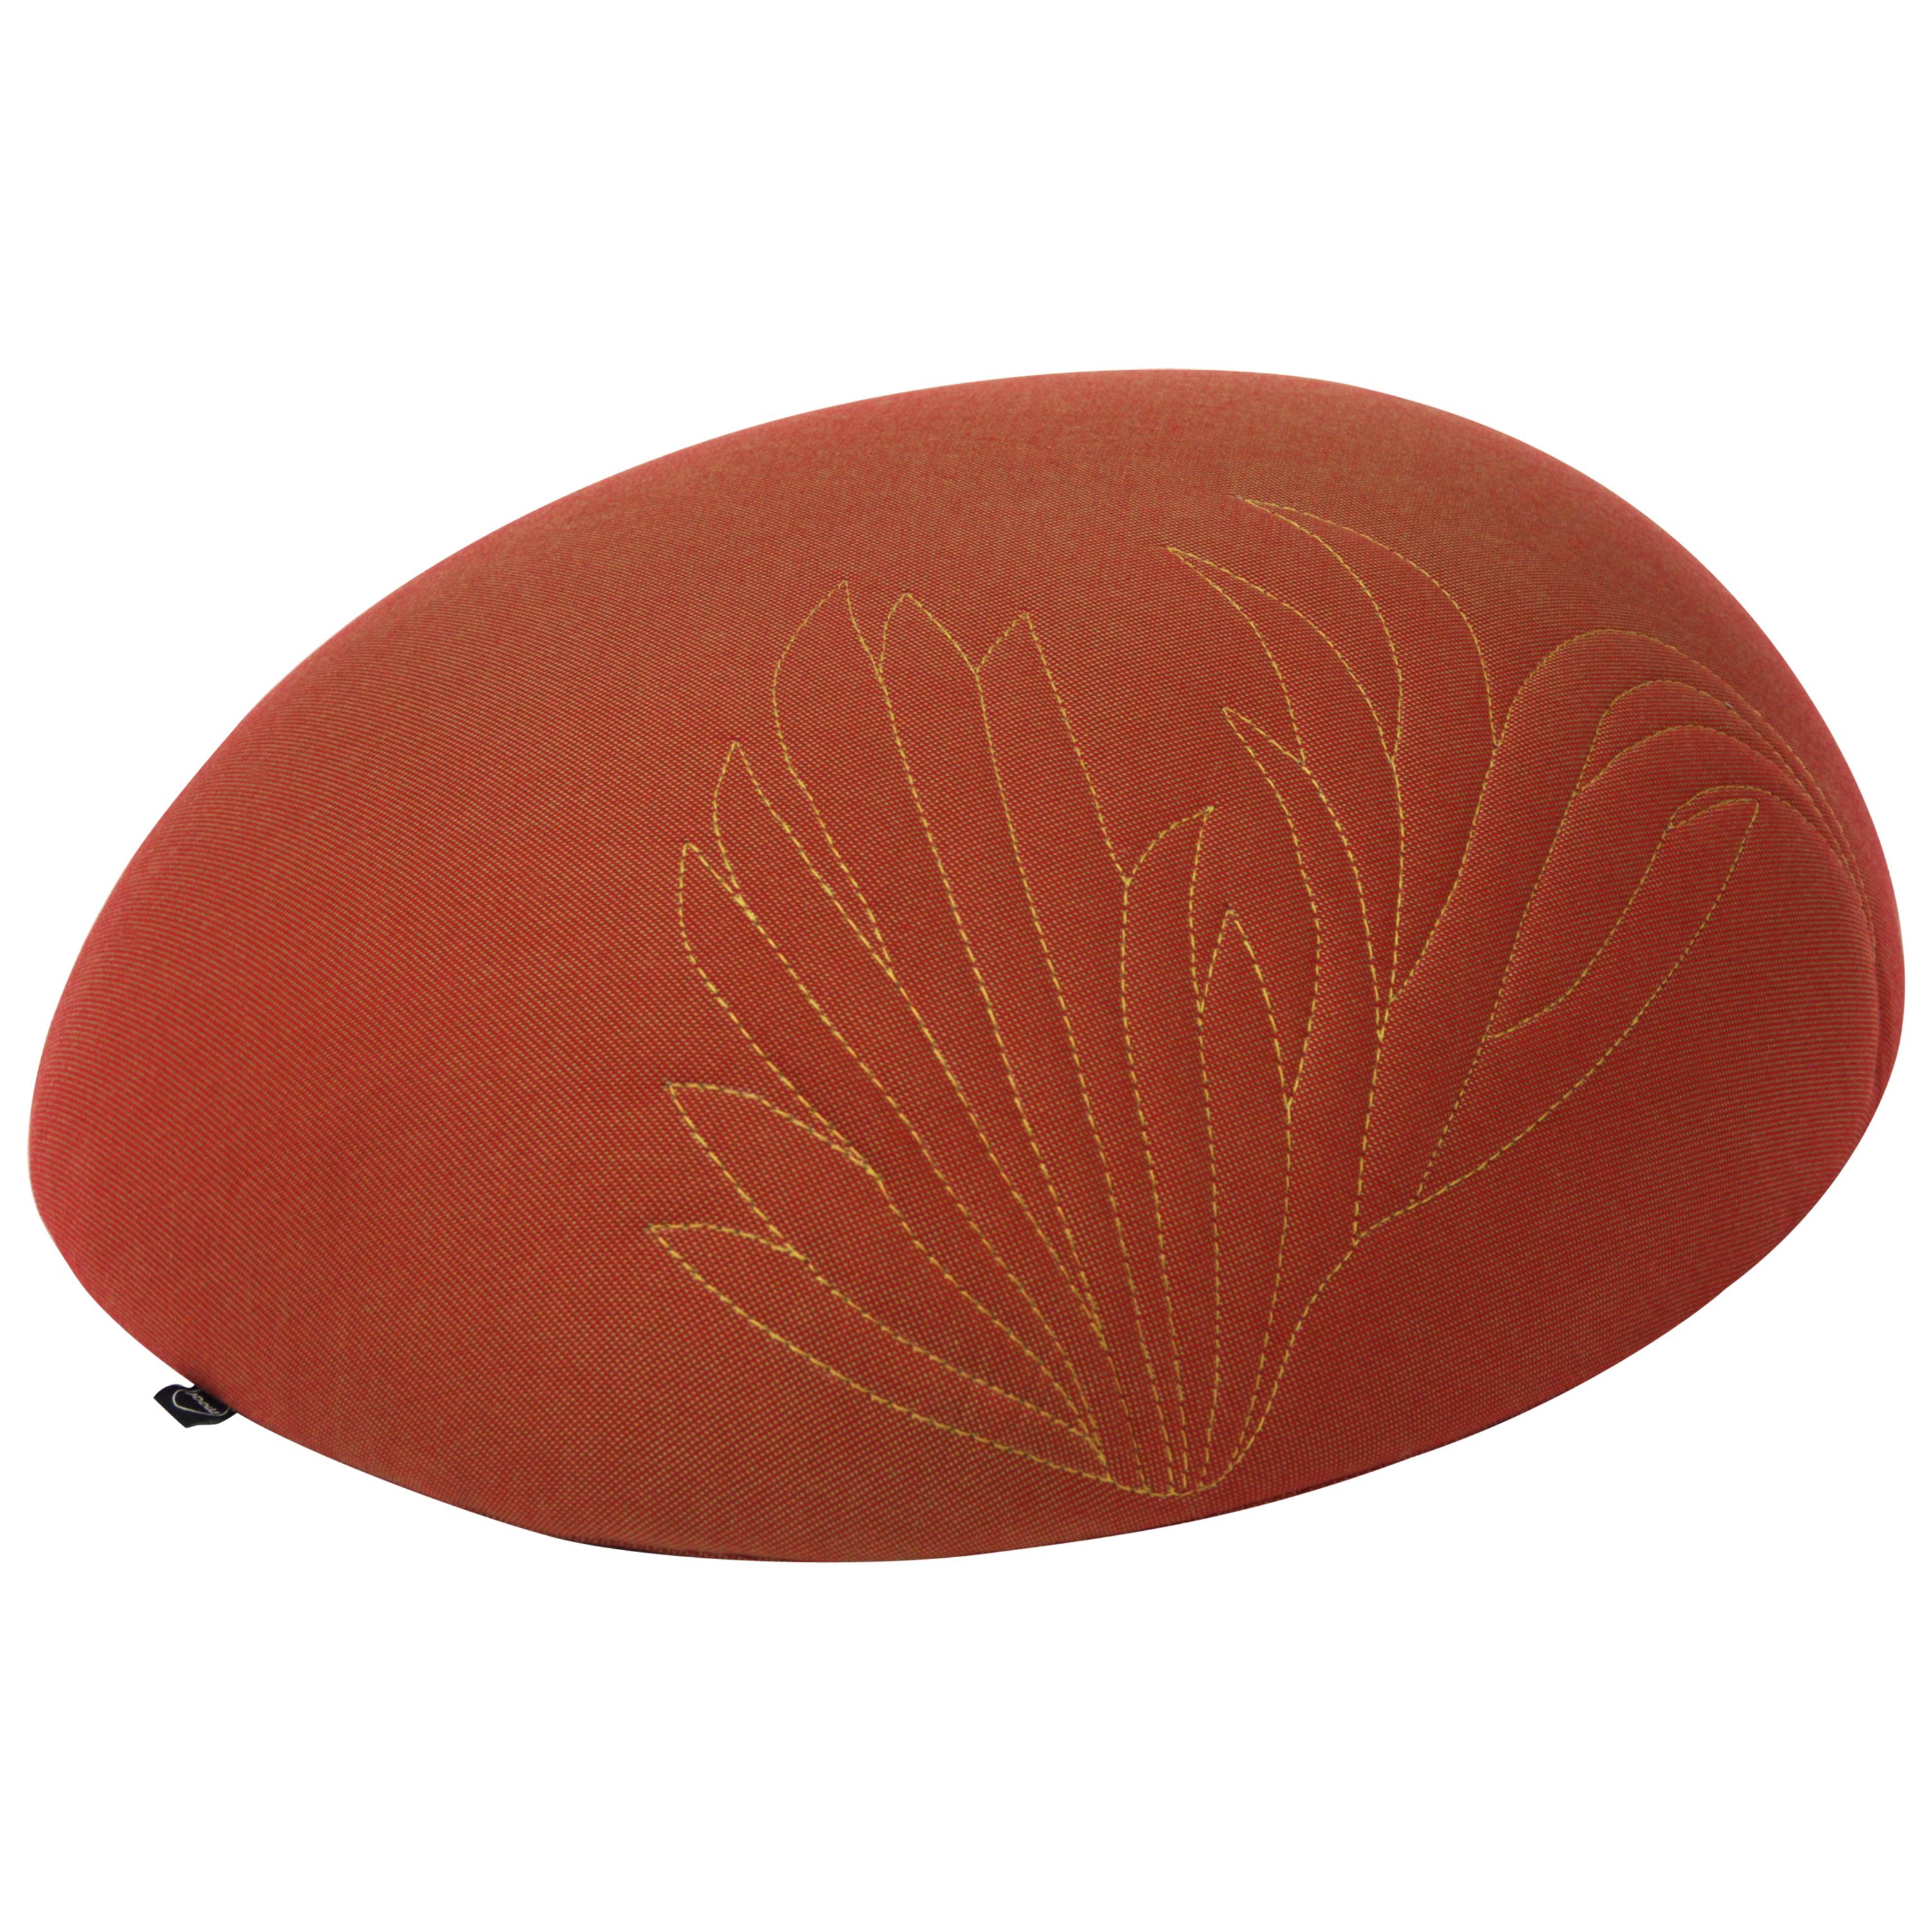 Quetzal Orange Stool by Mool, fabric Stool  For Sale